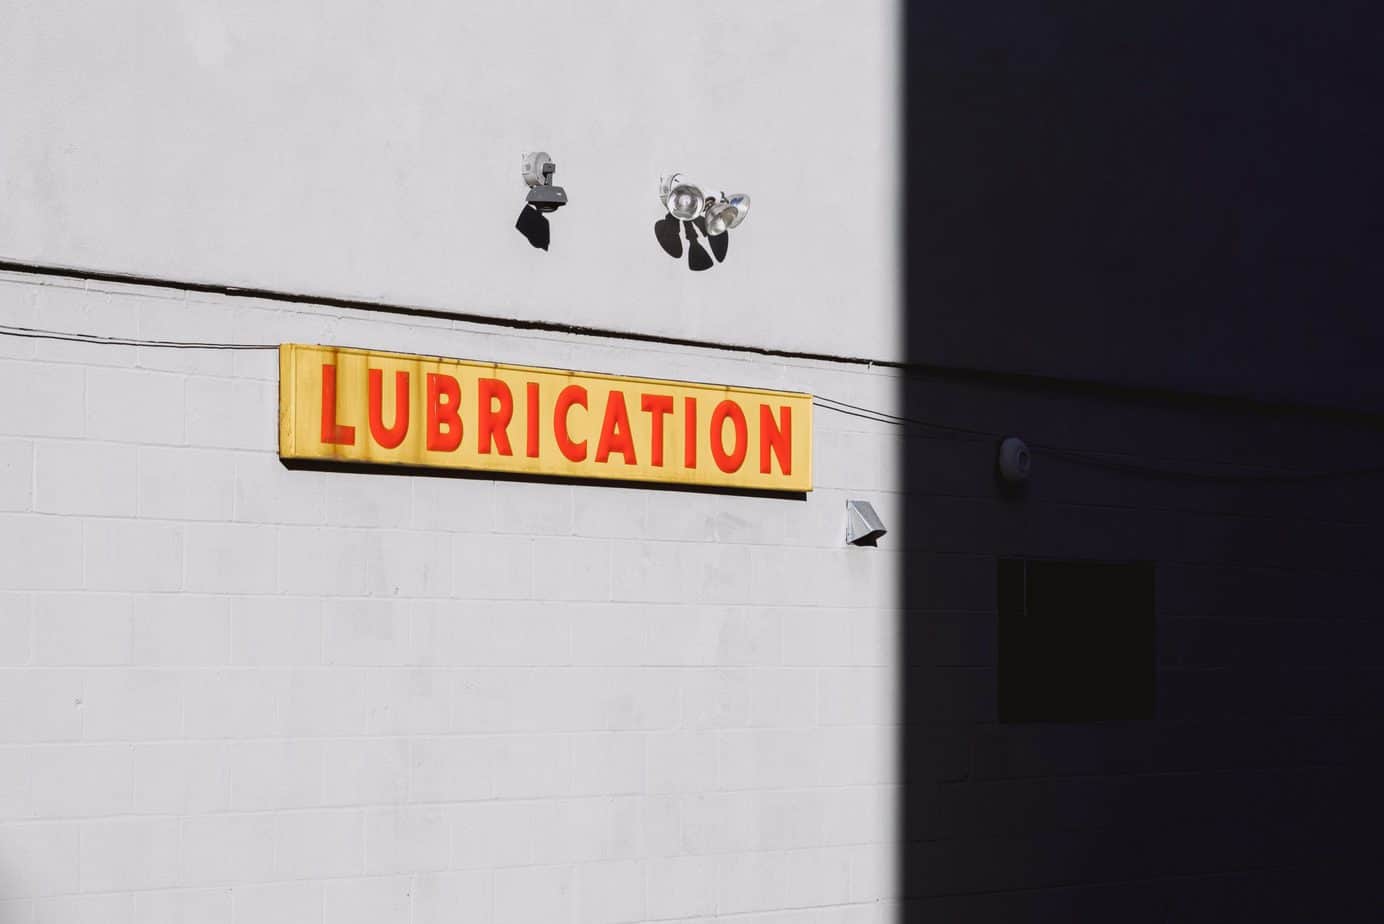 Lubricants: Why should we use them?